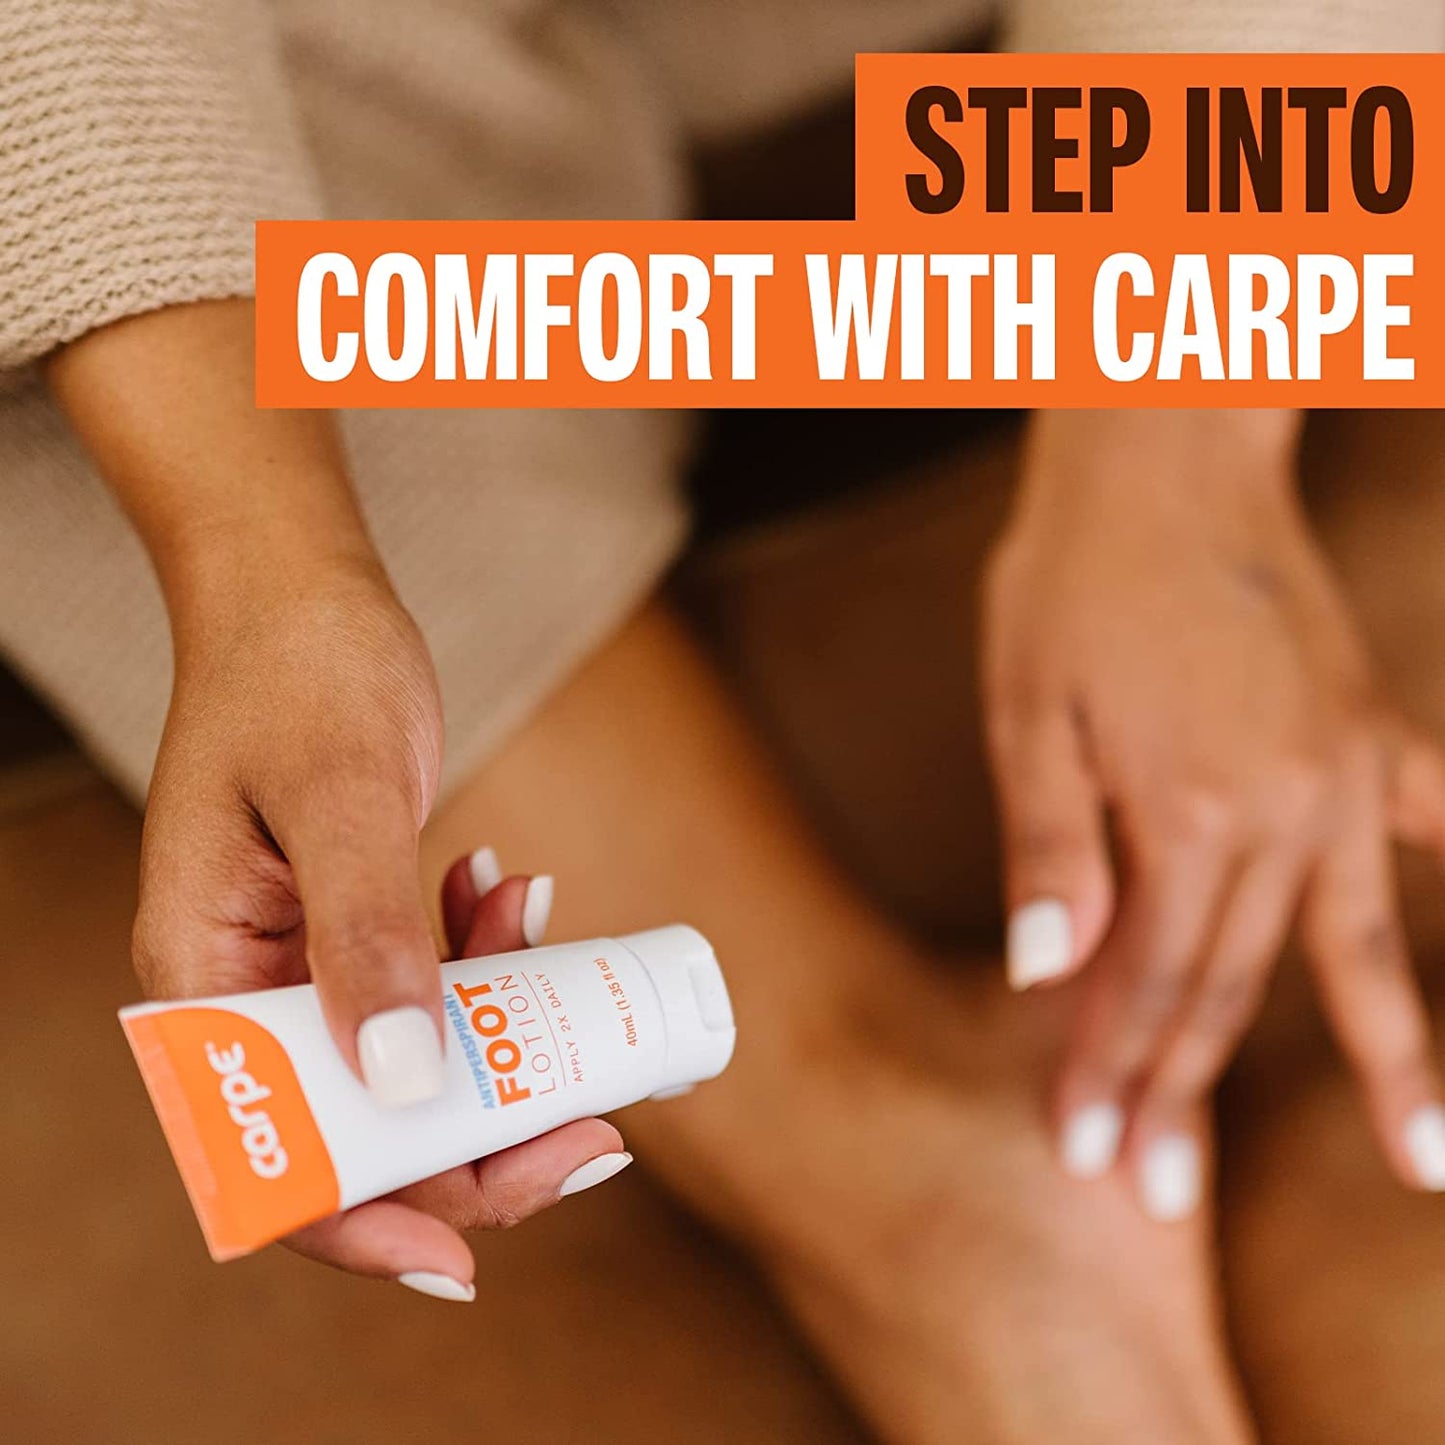 Dermatologist-Recommended Solution for Sweaty and Odorous Feet